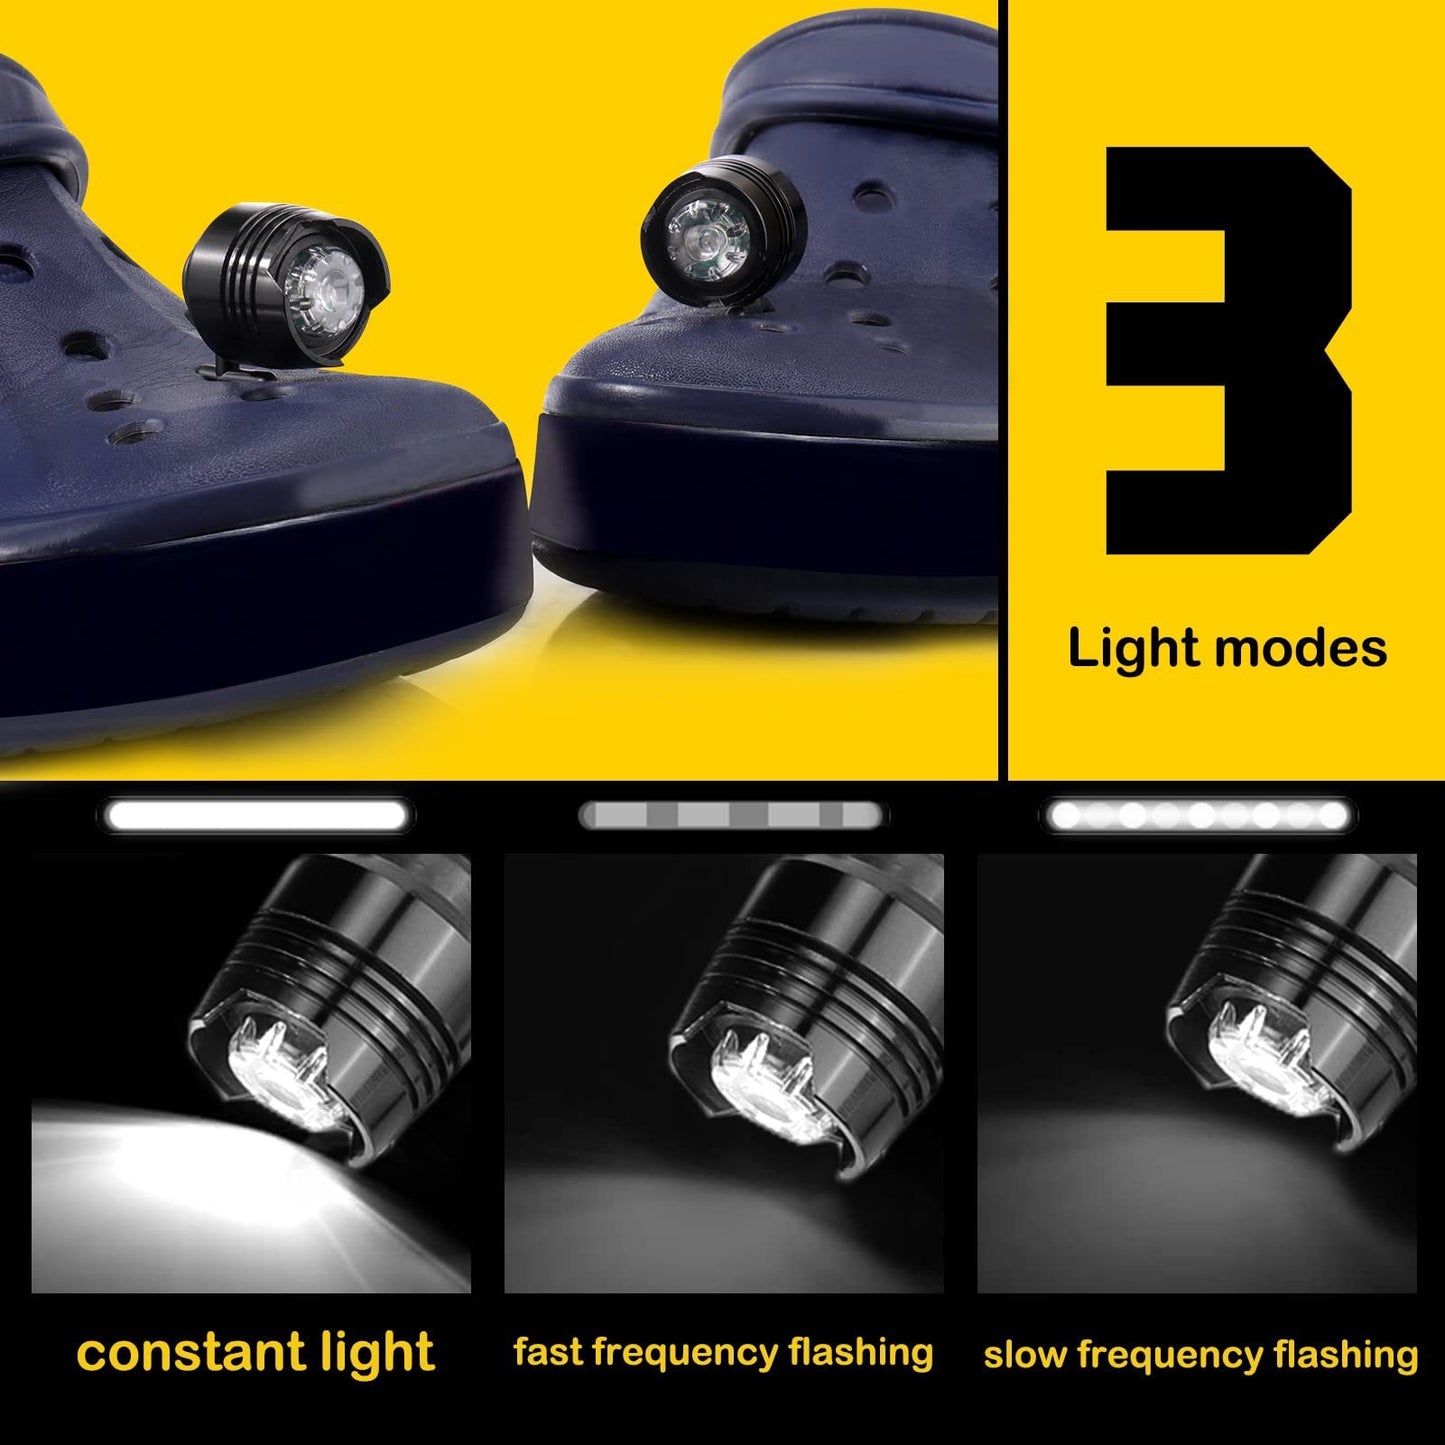 Headlights For Croc Lights Charms Accessories Decorations Shoe Charms Pin for Croc Fit Croc Charms Jeans Wholesale